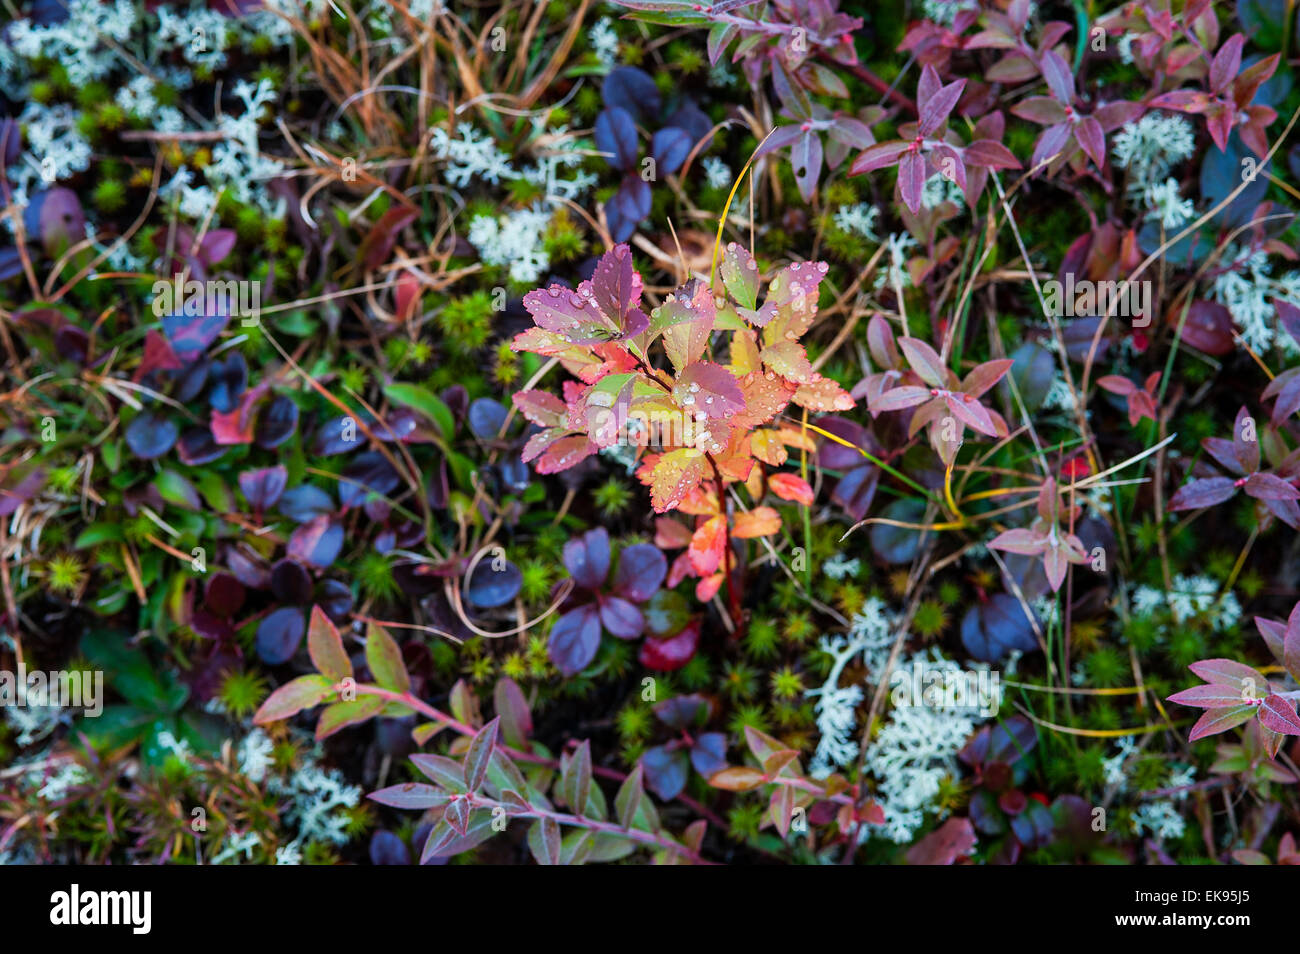 Colorful autumn groundcover plants. Stock Photo